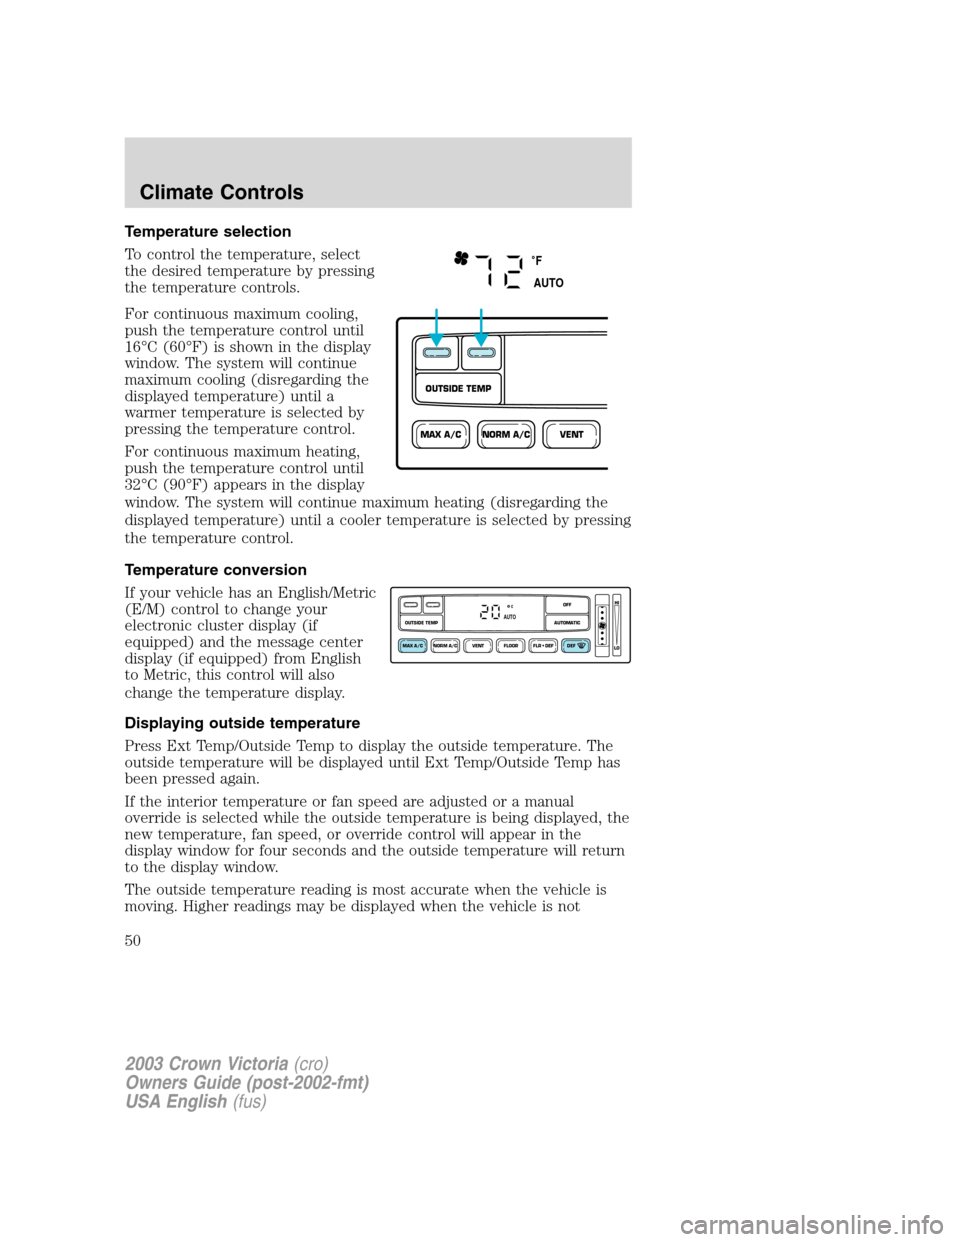 FORD CROWN VICTORIA 2003 2.G Owners Manual Temperature selection
To control the temperature, select
the desired temperature by pressing
the temperature controls.
For continuous maximum cooling,
push the temperature control until
16°C (60°F) 